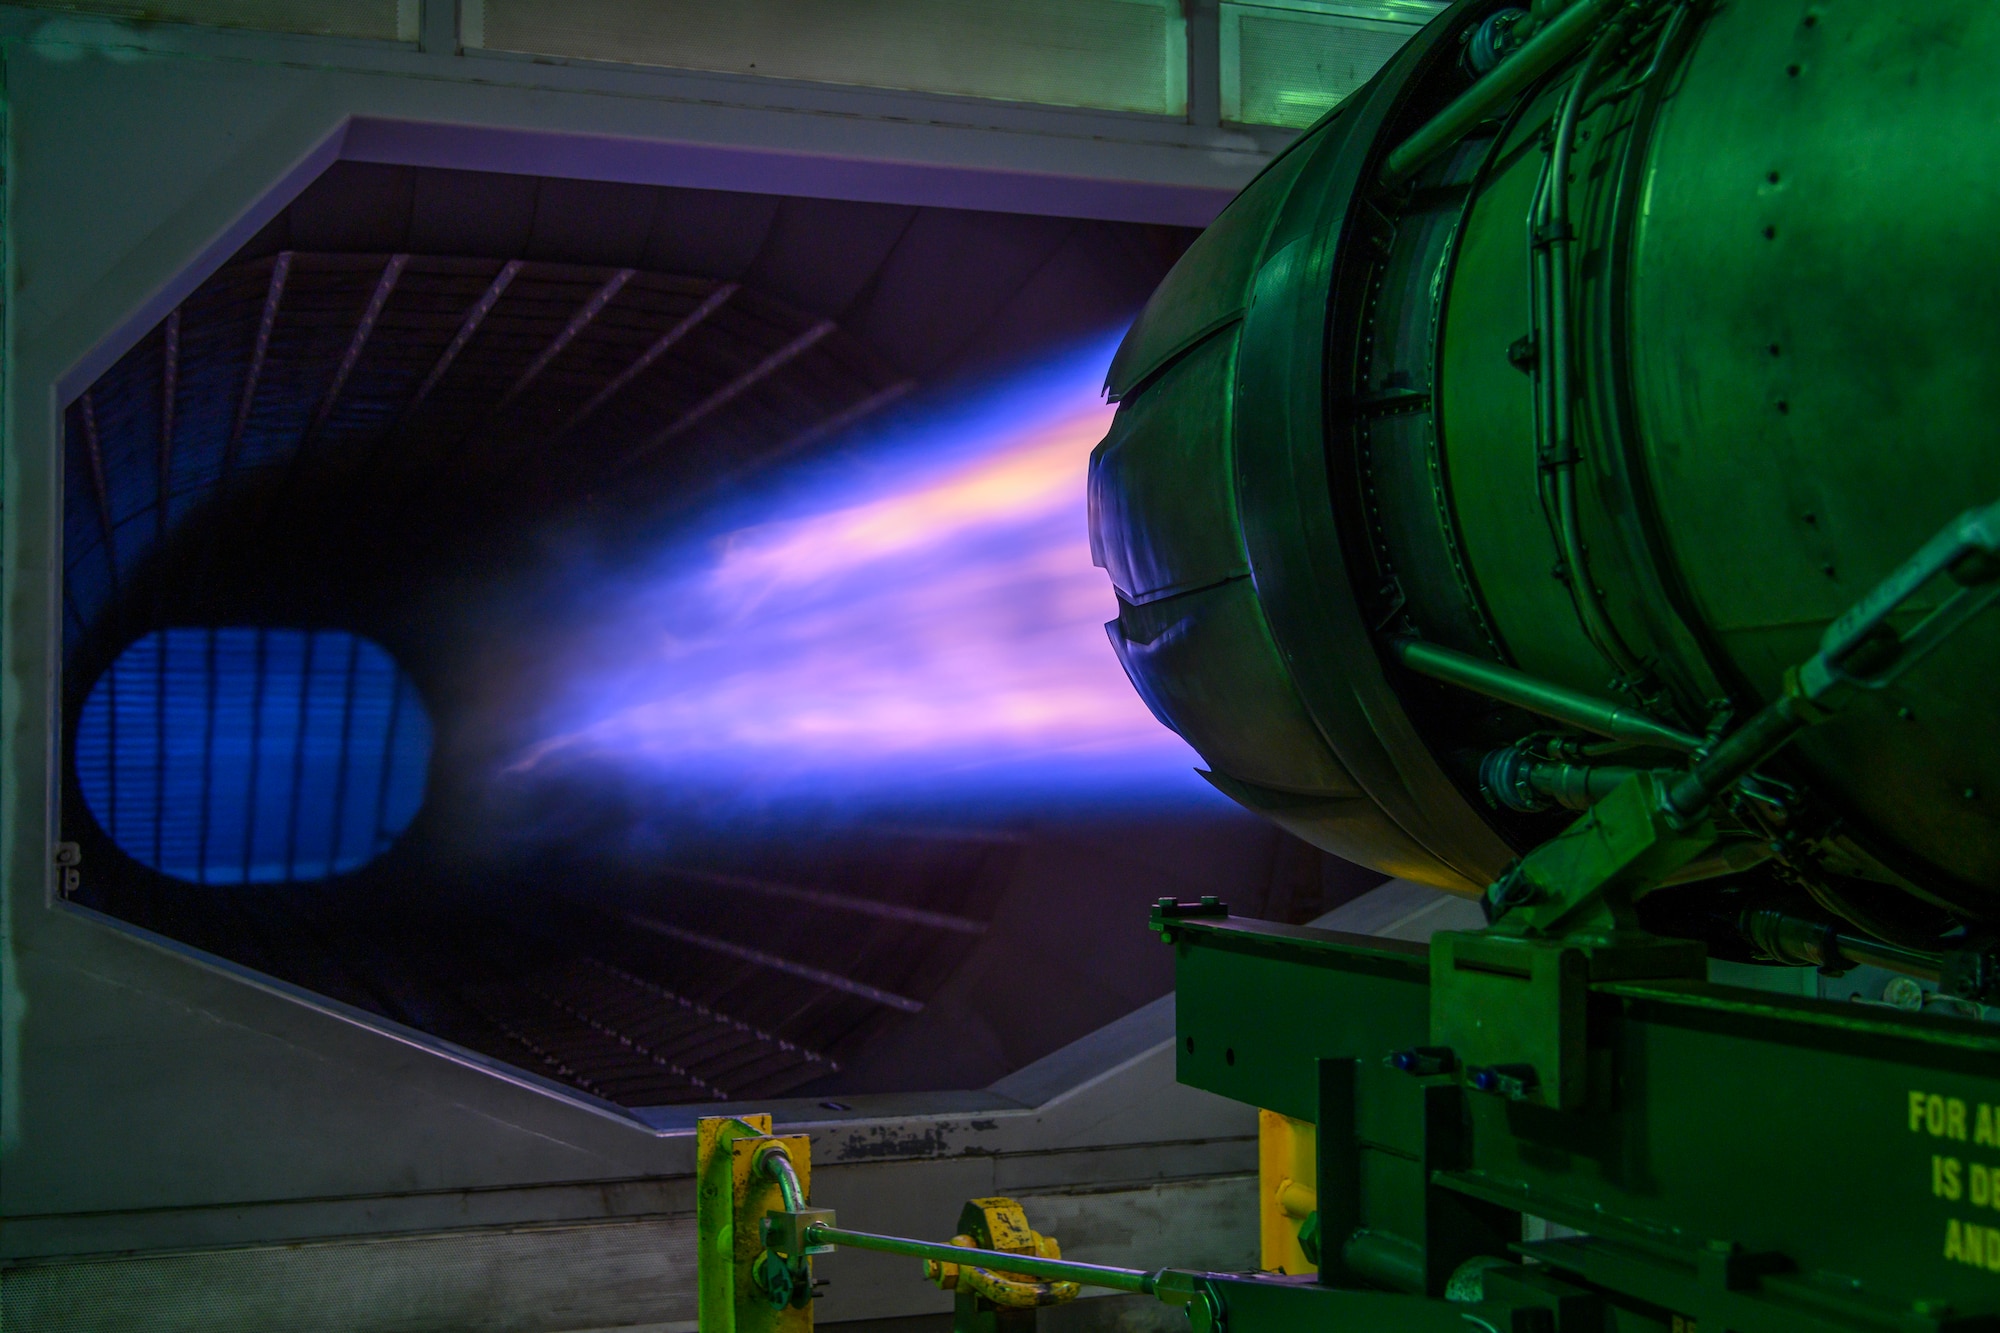 An F-16 Fighting Falcon engine runs at full afterburner at Misawa Air Force Base, Japan, Sept. 29, 2020. The 35th Maintenance Squadron aerospace propulsion test cell Airmen are the last line of defense before an engine goes back into an aircraft, ensuring F-16 engine units are safe and ready for flight. (U.S. Air Force photo by Airman 1st Class China M. Shock)